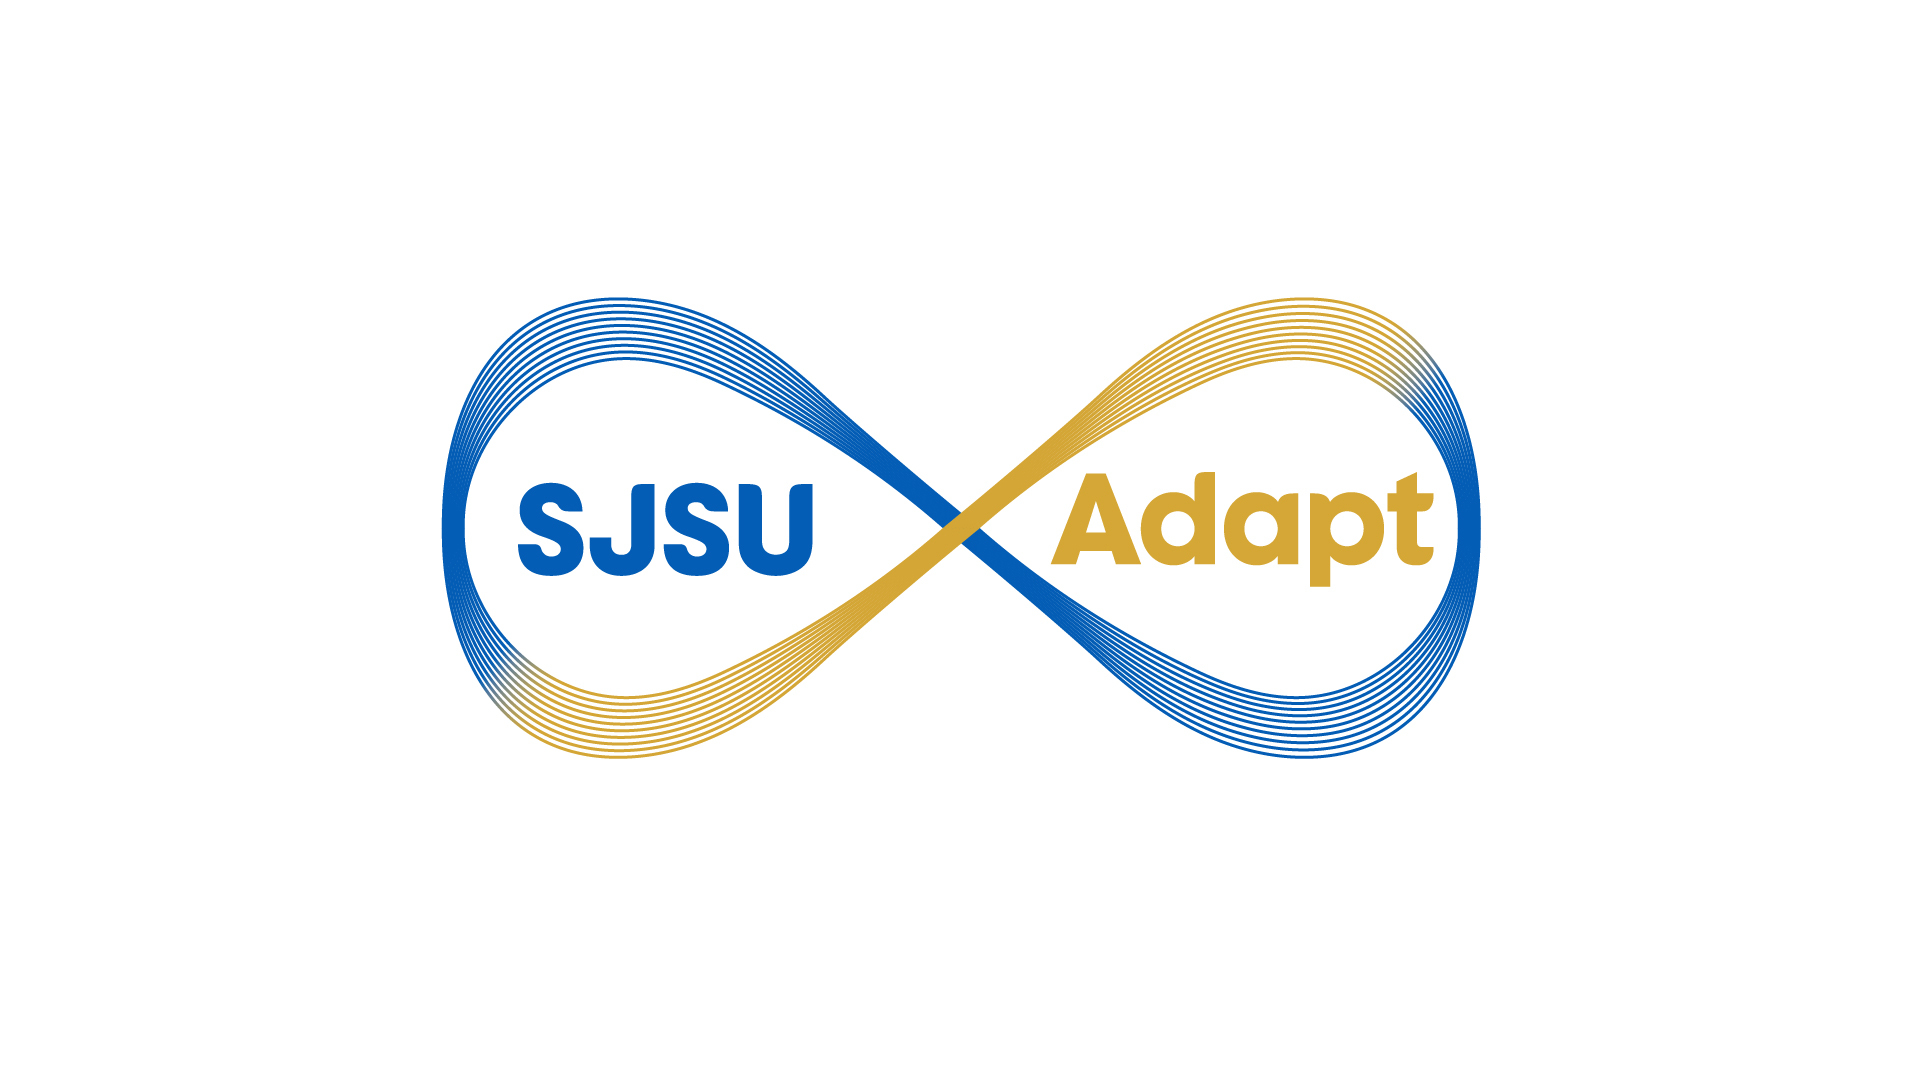 Blue and gold infinity symbol with SJSU Adapt within each loop.